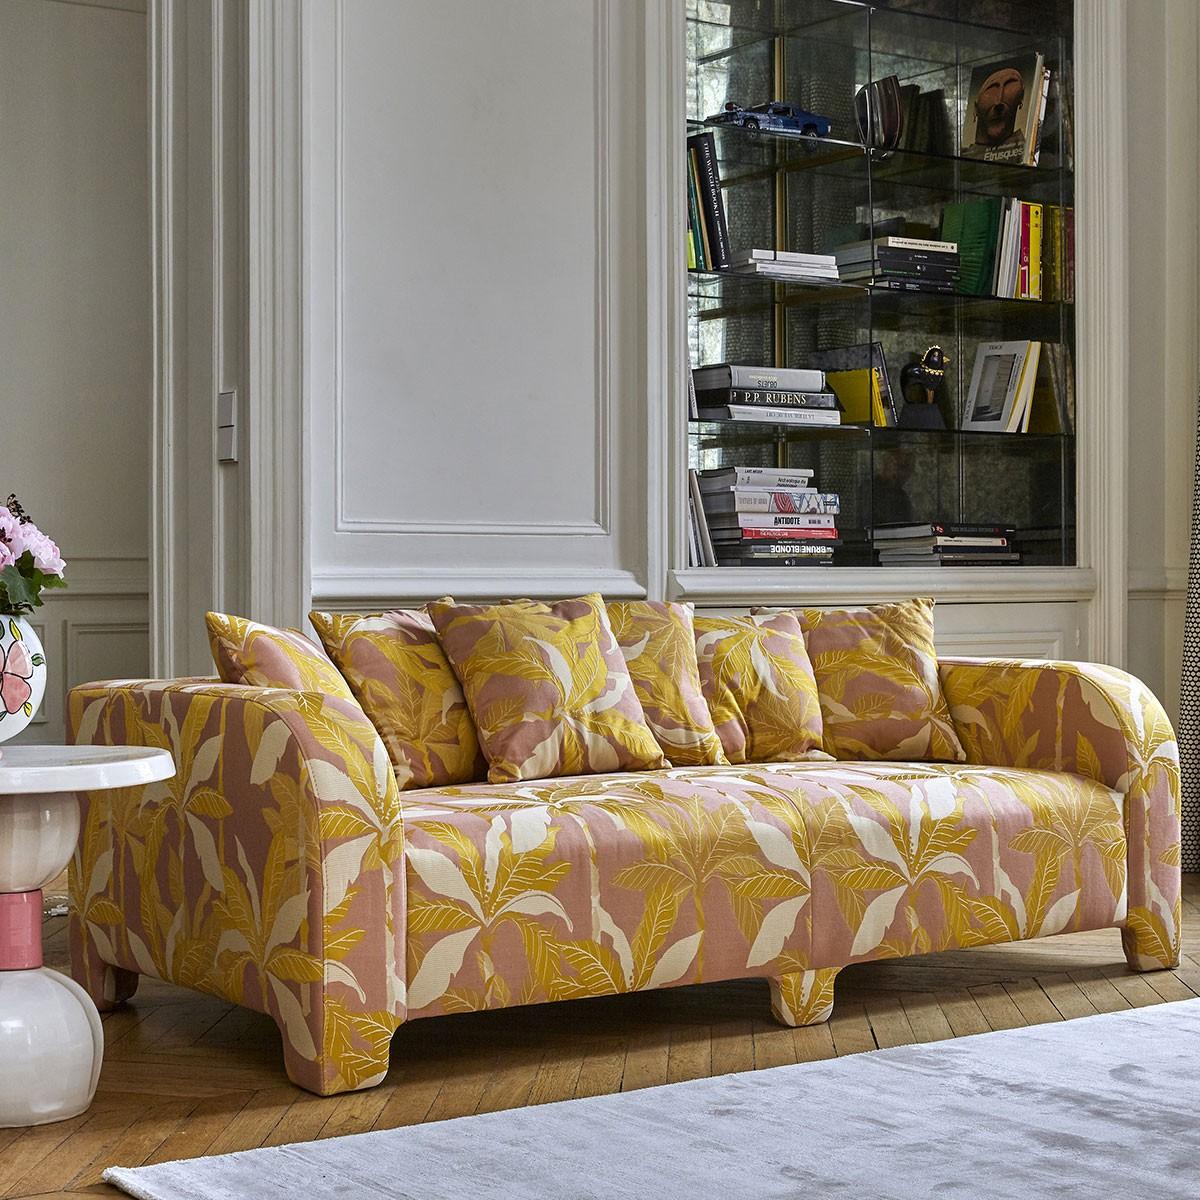 Popus Editions Graziella 2 seater sofa in pink verone velvet upholstery

A foot that hides another. A cushion that hides another. A curve that hides another with contemporary lines and a base like a punctuation mark, this sofa gives pride of place